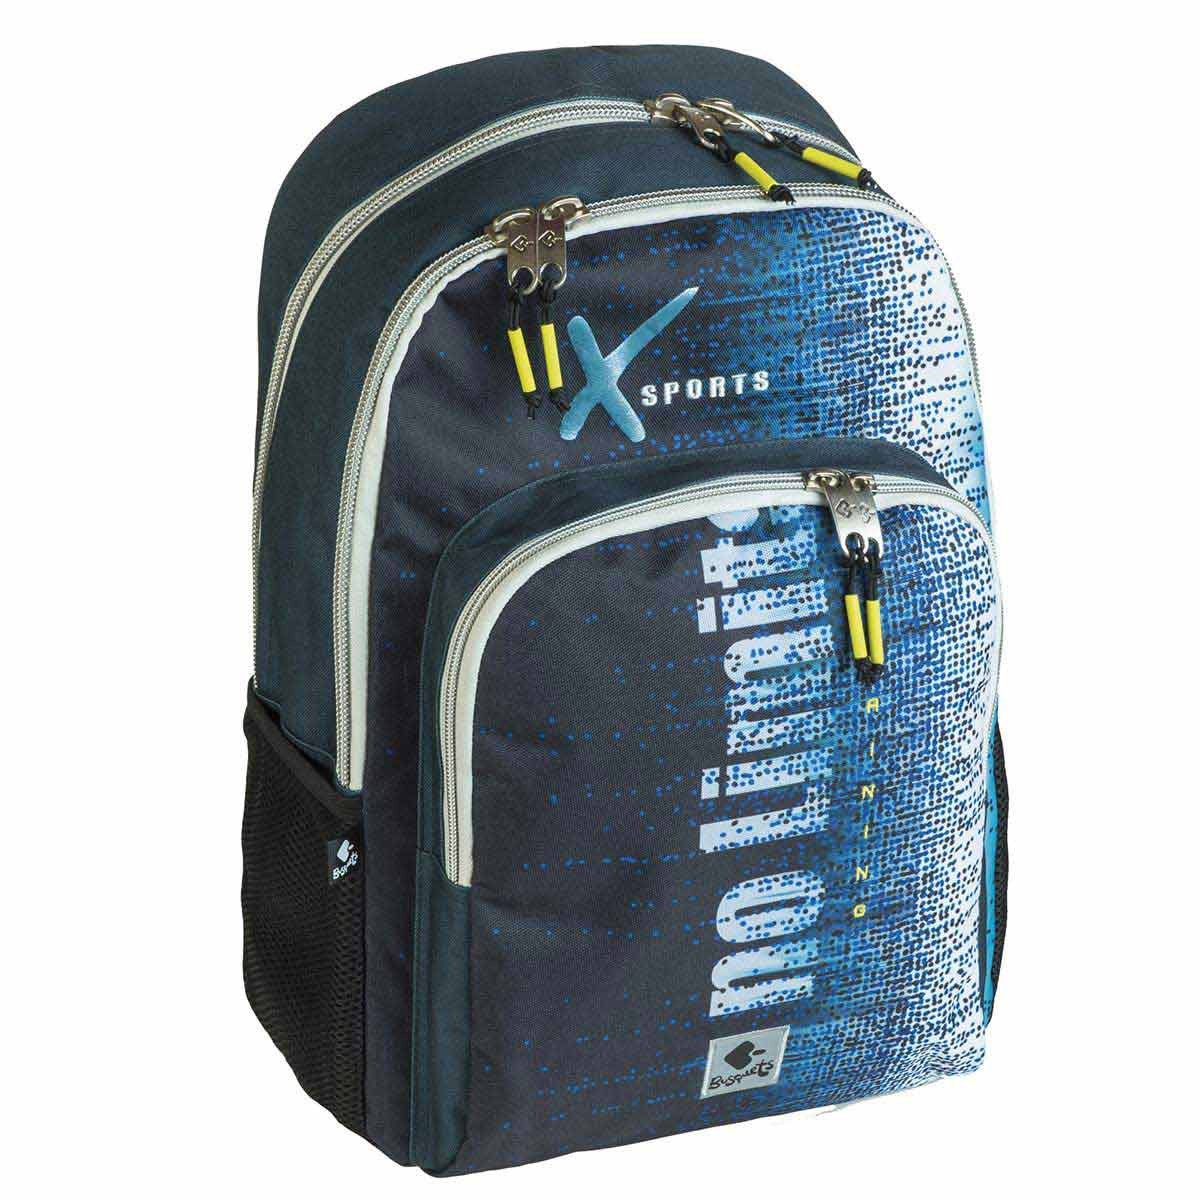 XSPORTS DOUBLE BACKPACK 30X45X15CM